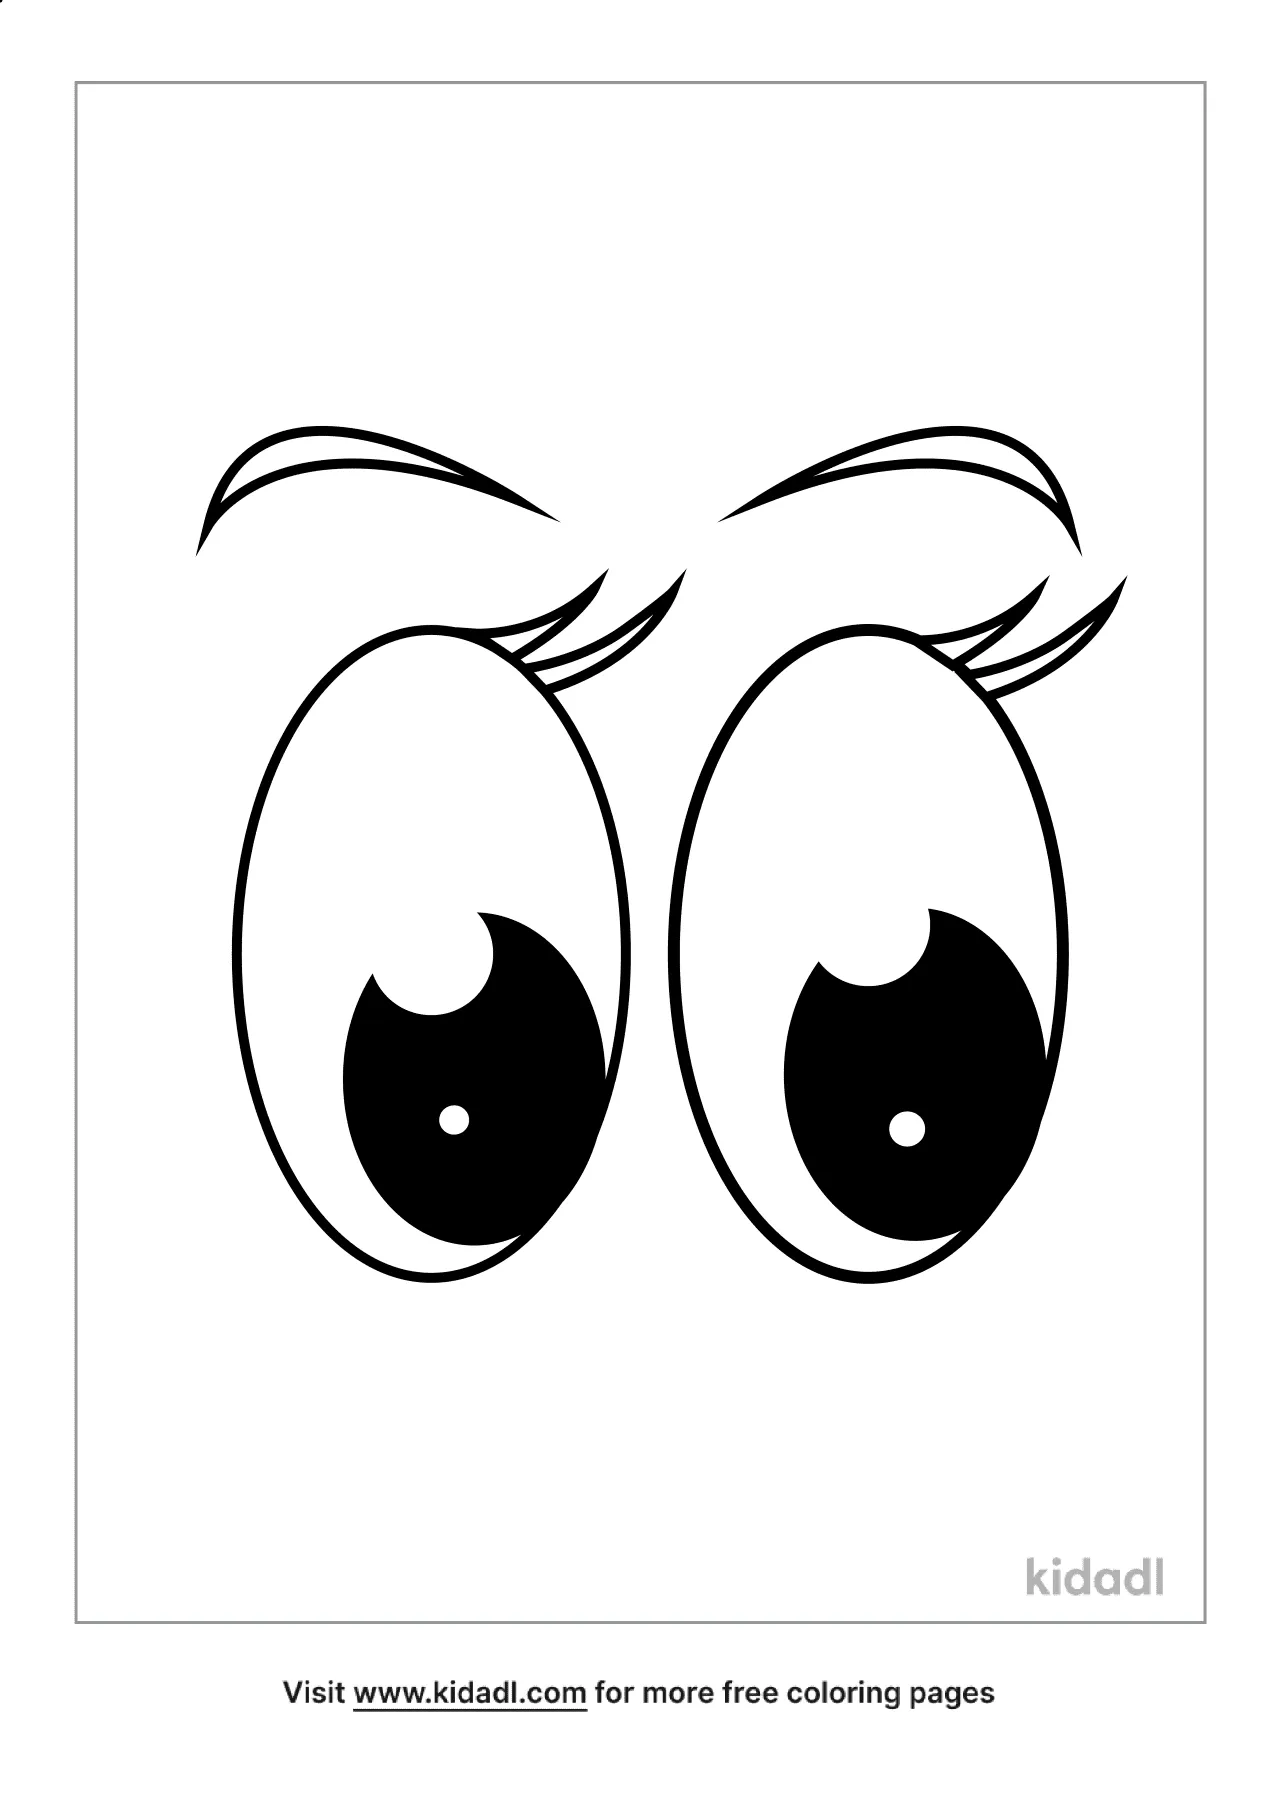 coloring pages about eyes